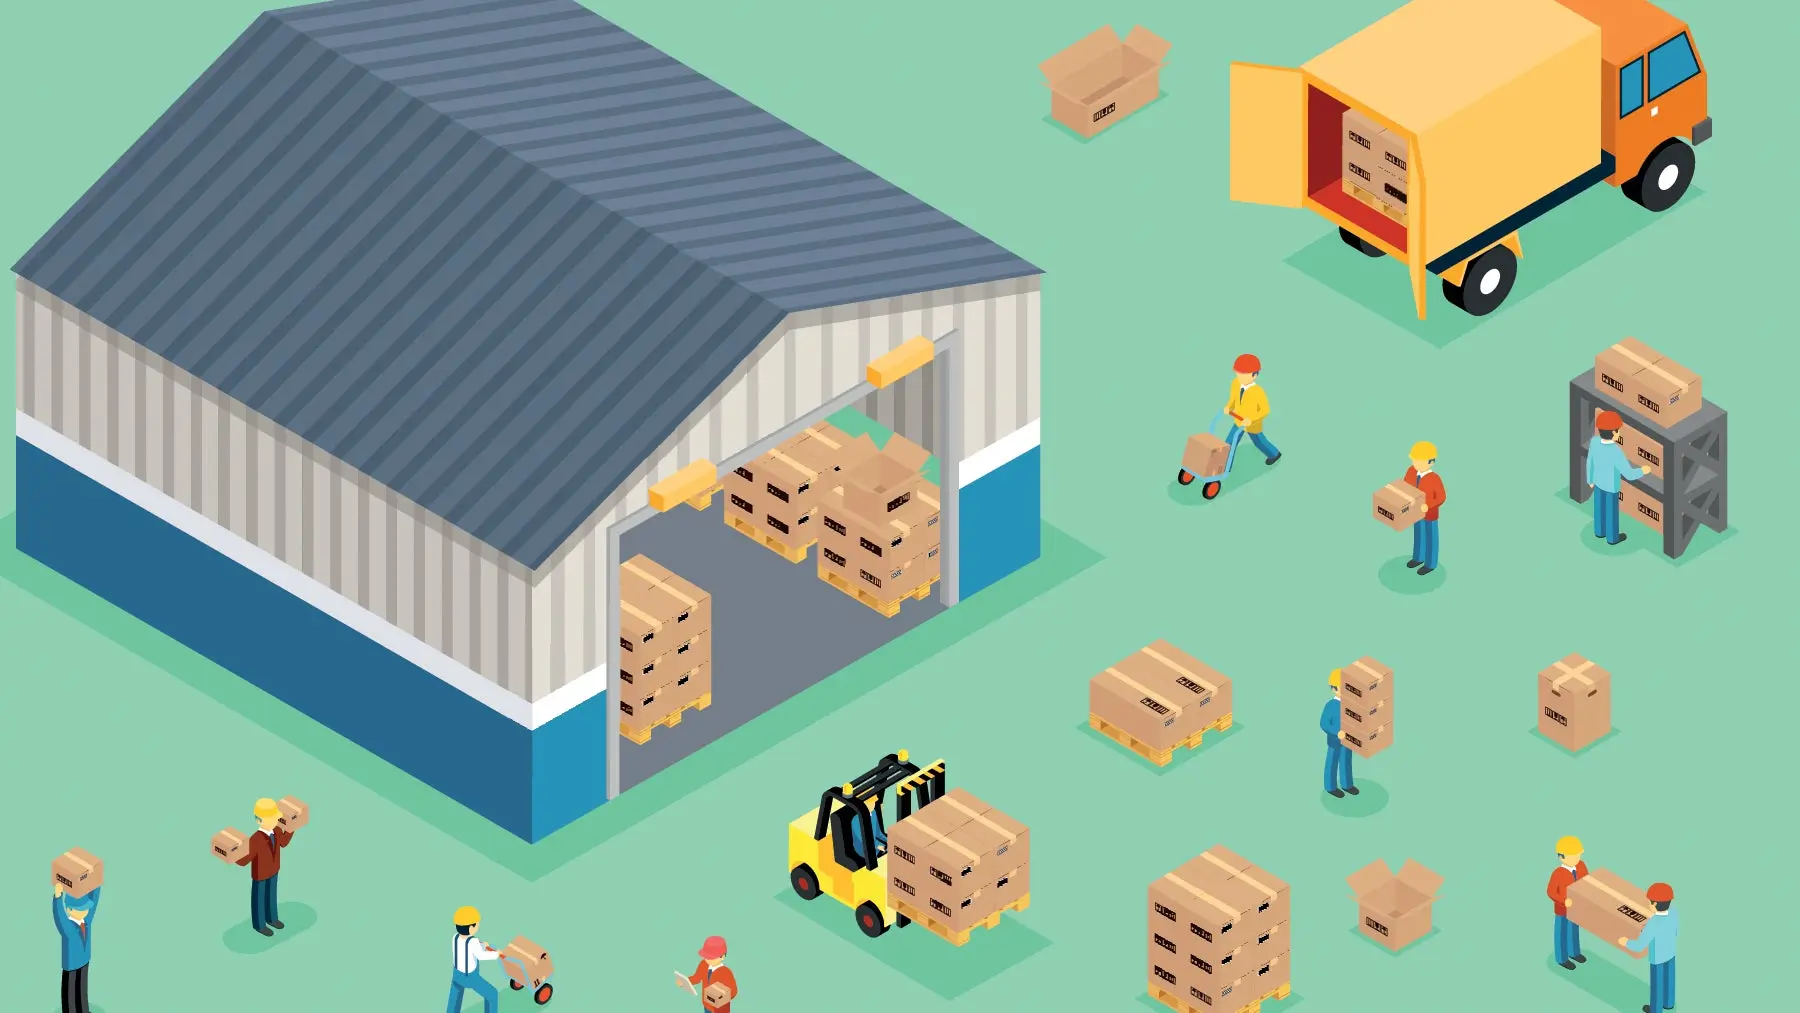 Illustration of people loading boxes into a warehouse.